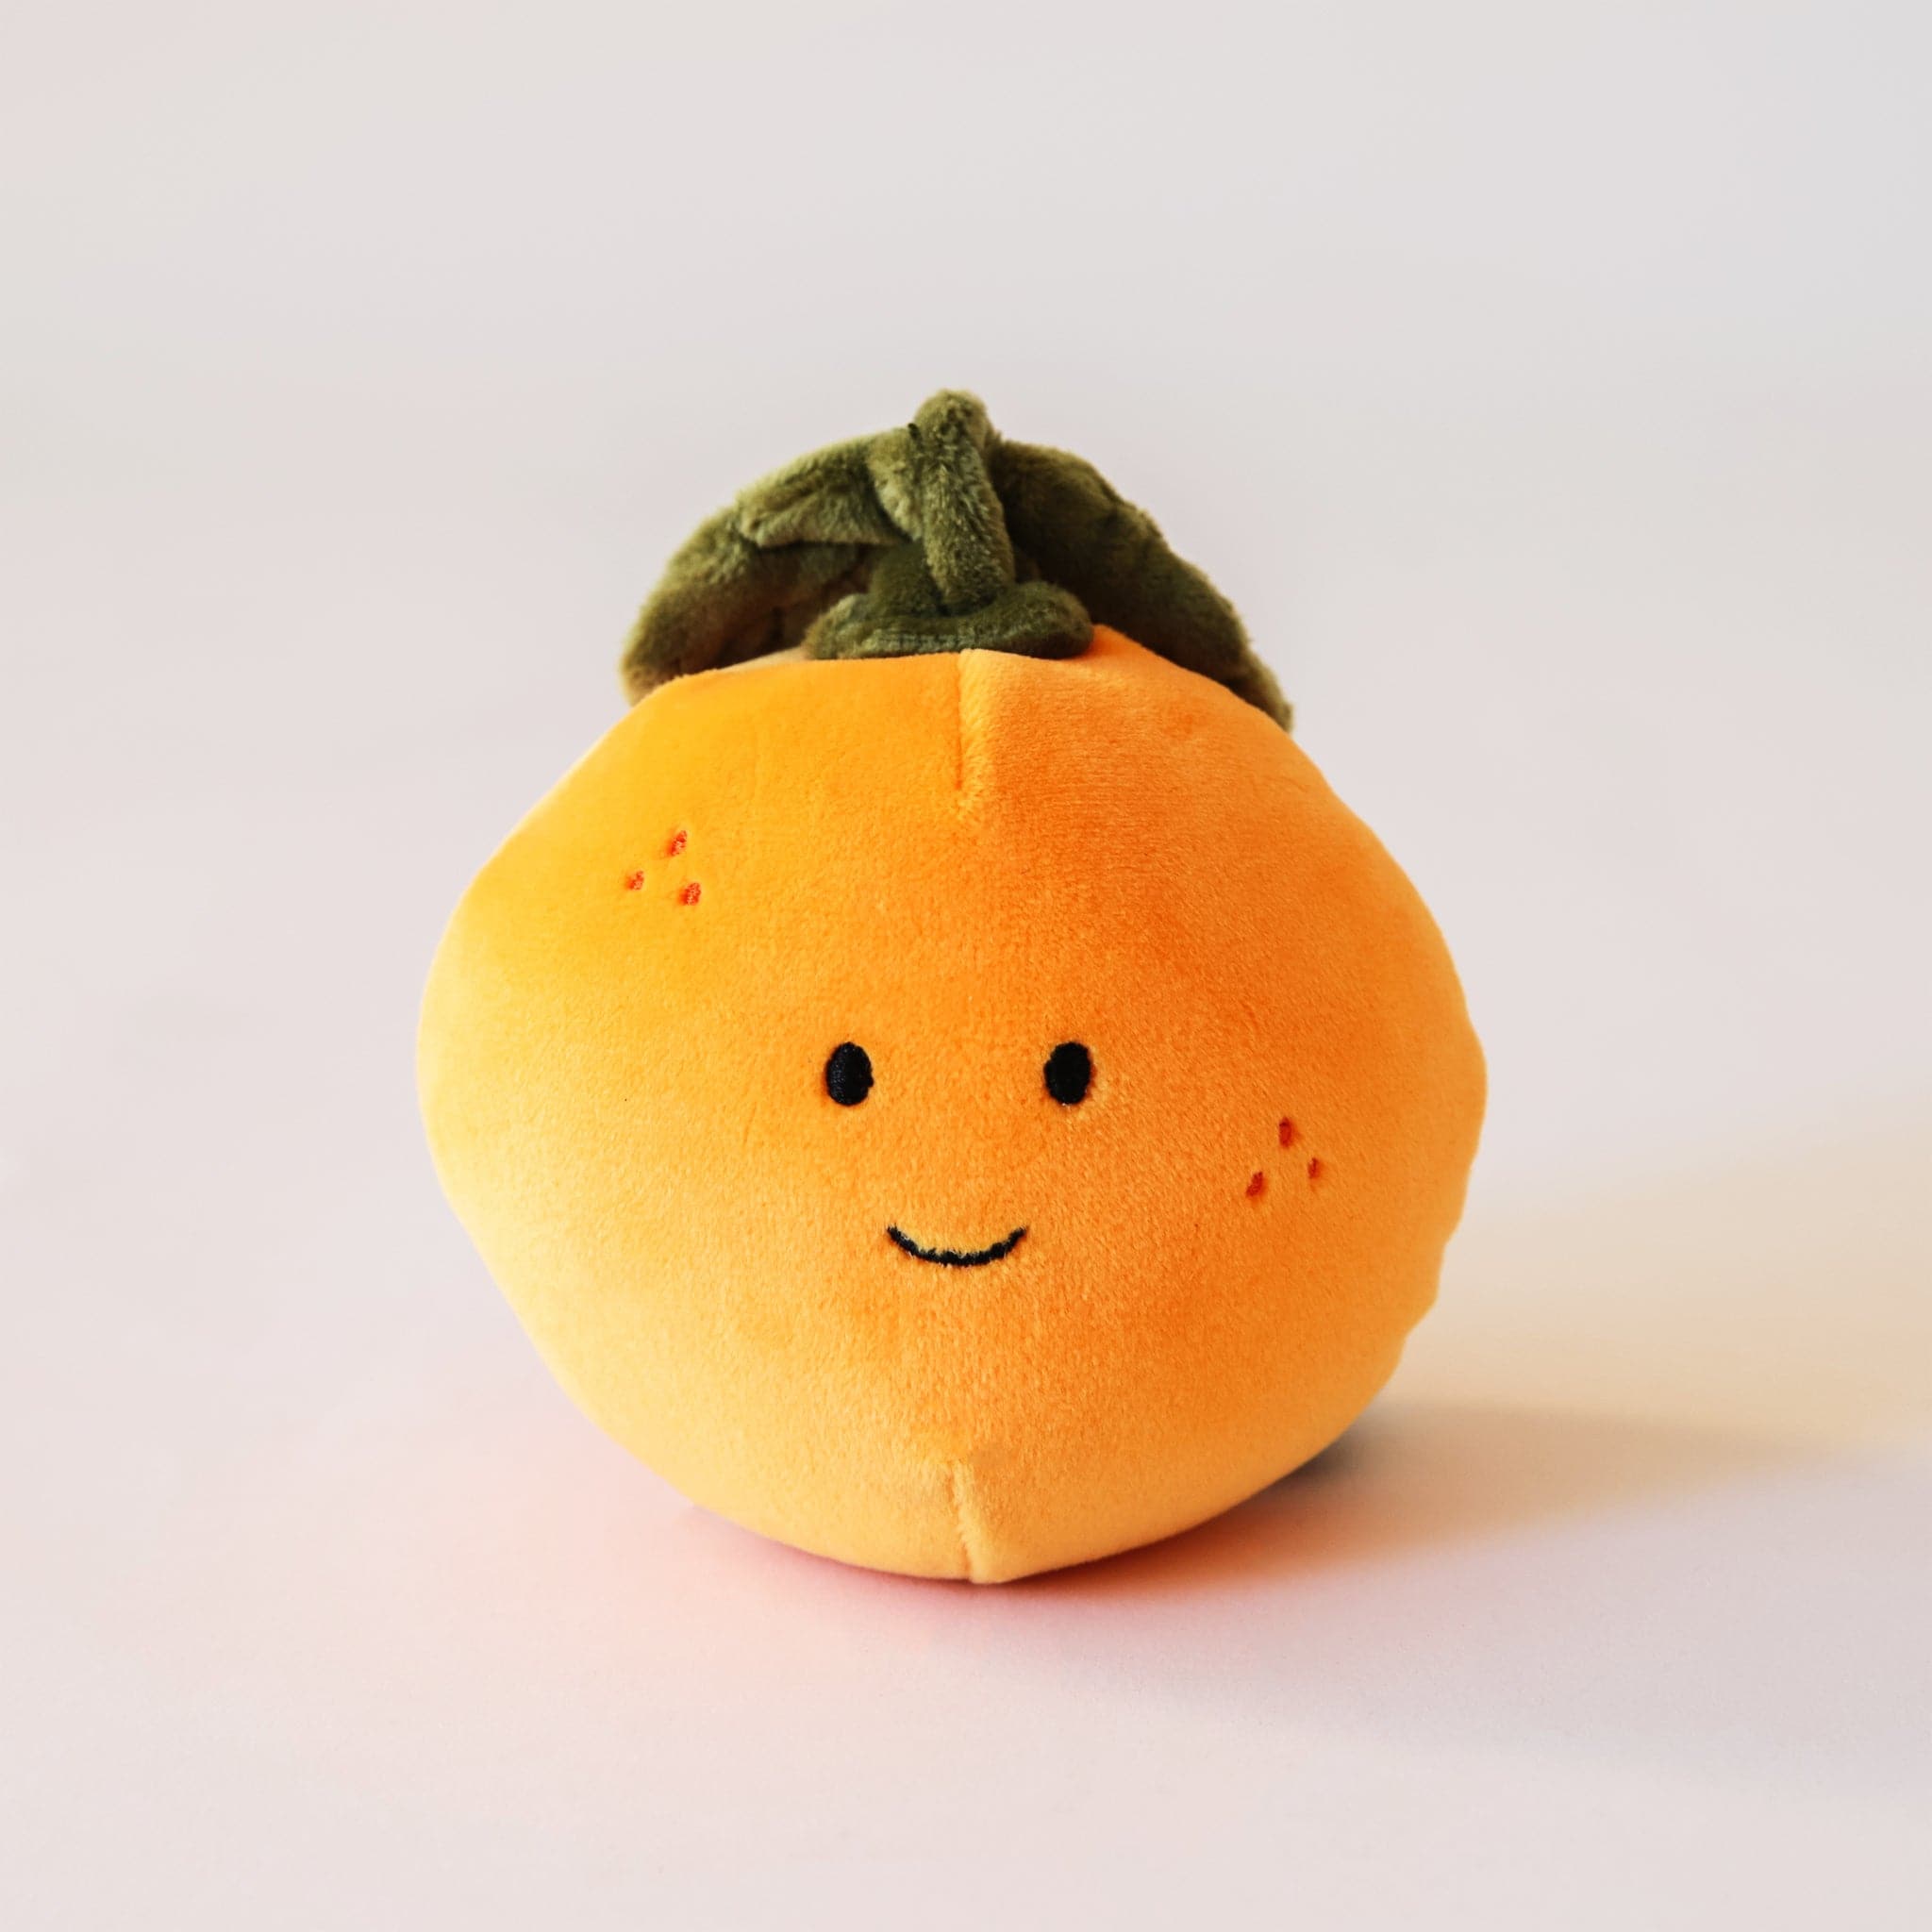 Adorable, plush oranges with sweet smiles and speckled cheeks. With floppy green leaves, these oranges are the absolute cutest. Their fur is soft and their leaves are floppy.